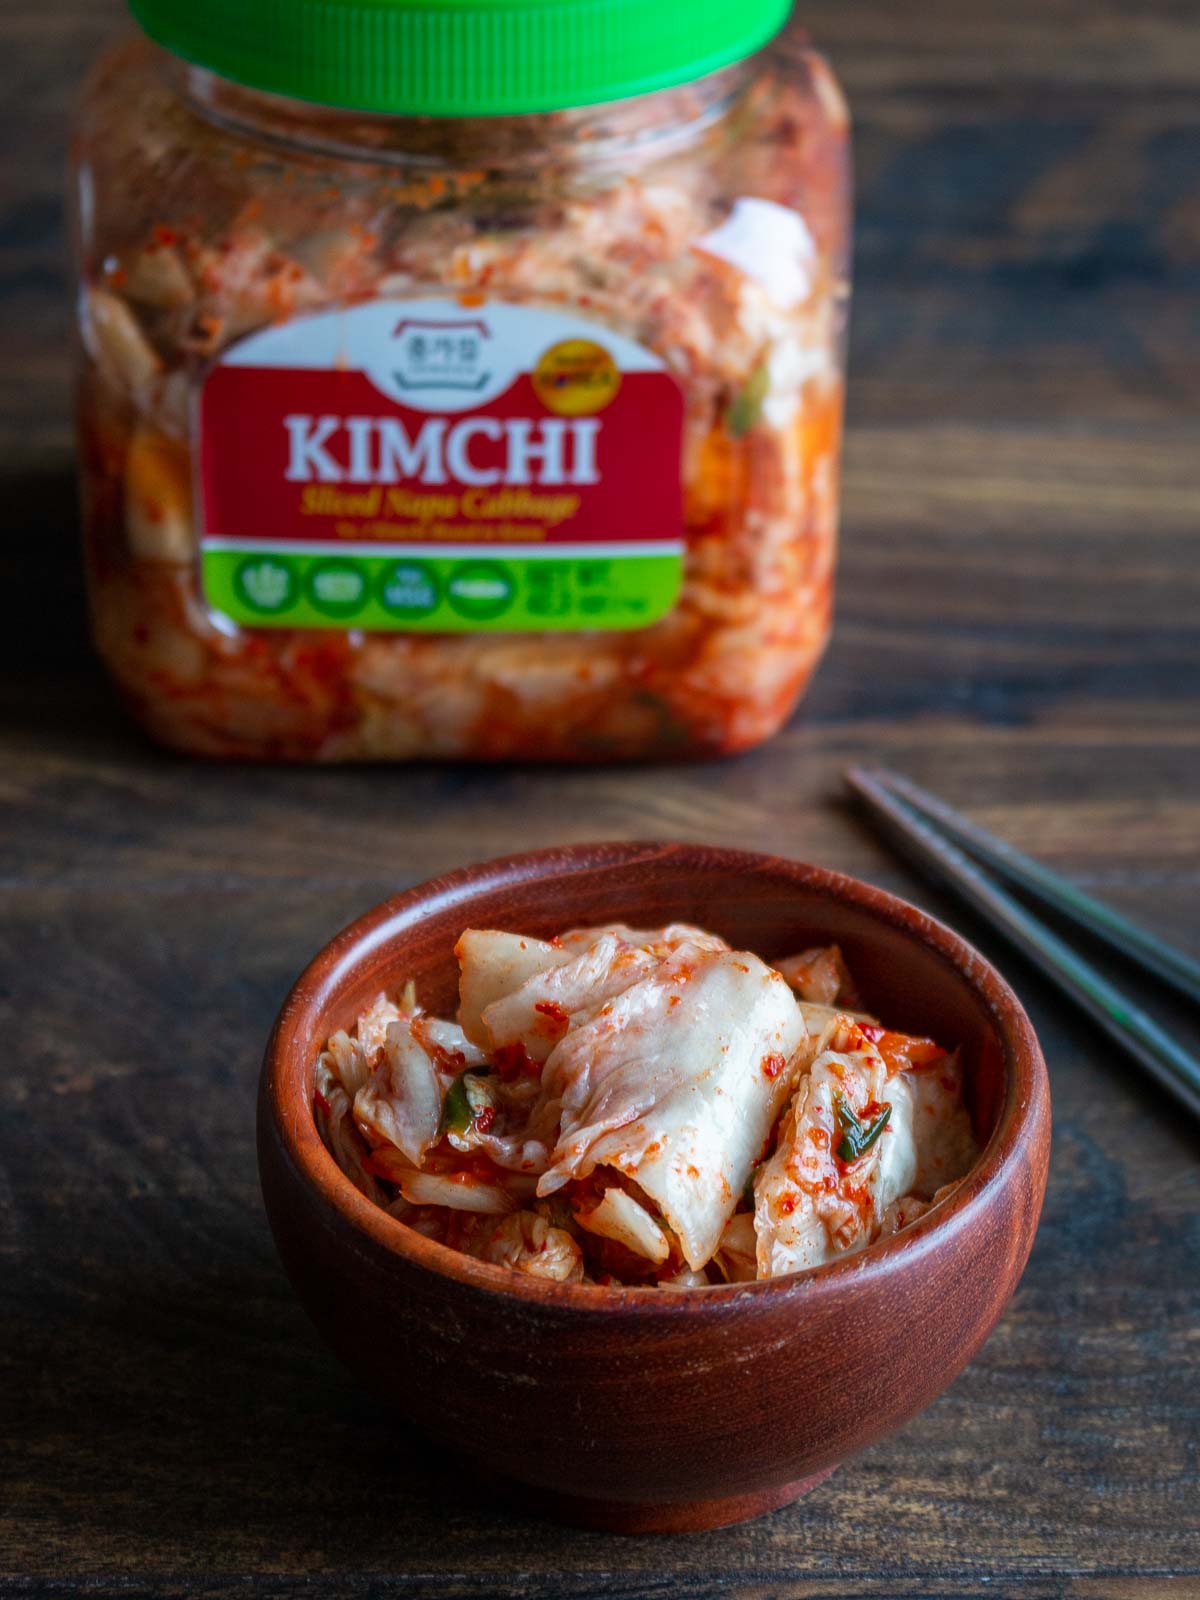 Kimchi in a wooden bowl with a container of kimchi in the background.